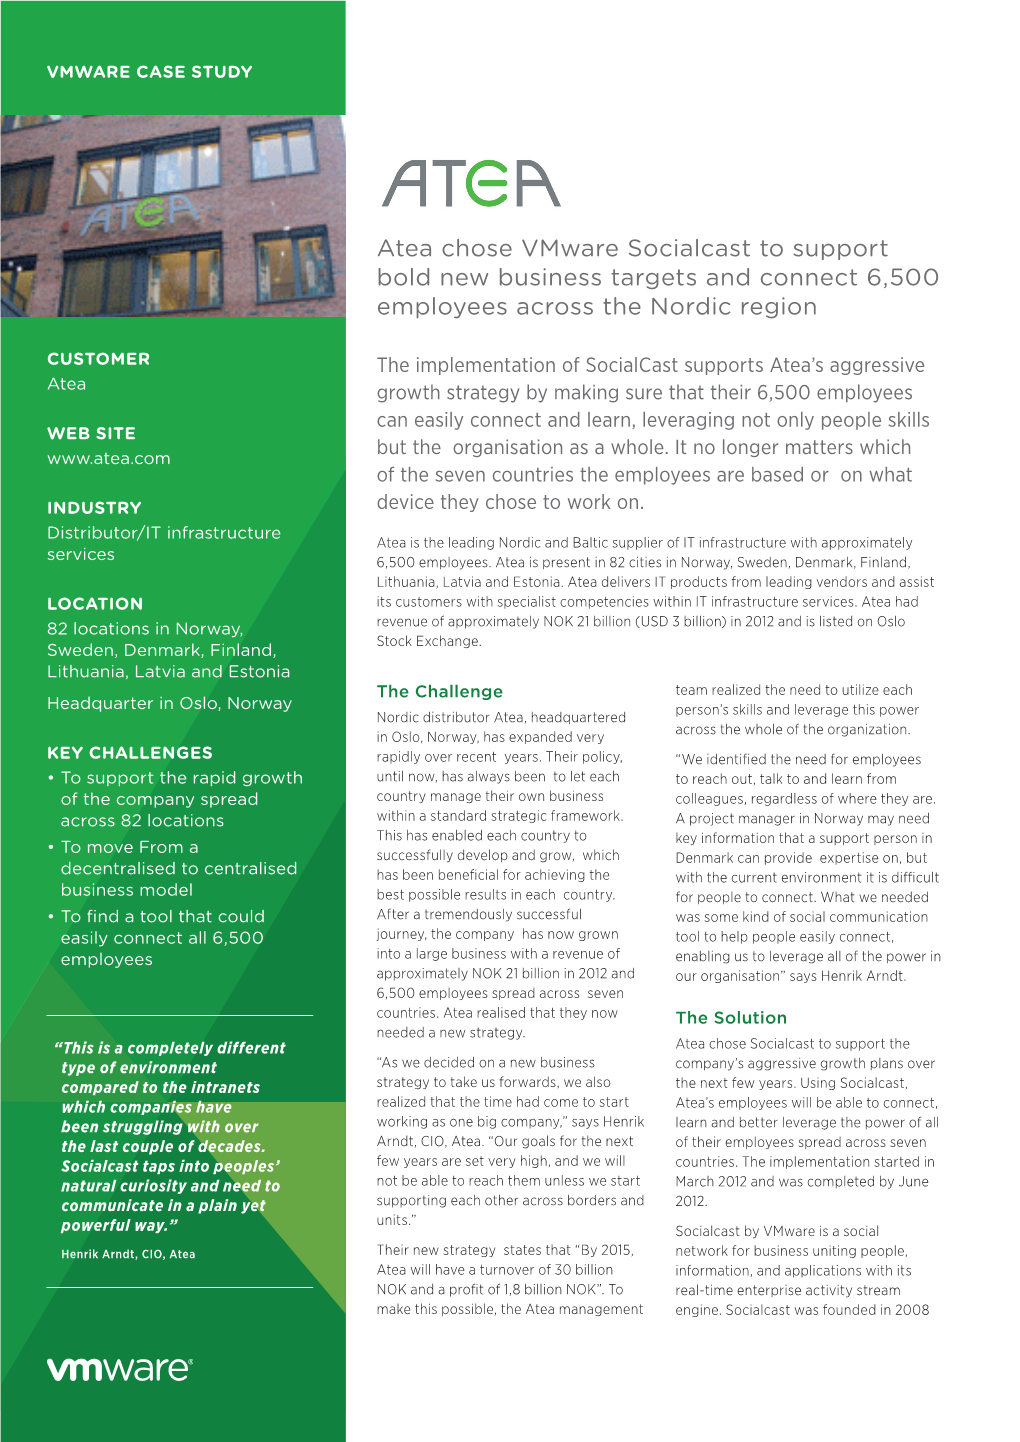 Atea Chose Vmware Socialcast to Support Bold New Business Targets and Connect 6,500 Employees Across the Nordic Region